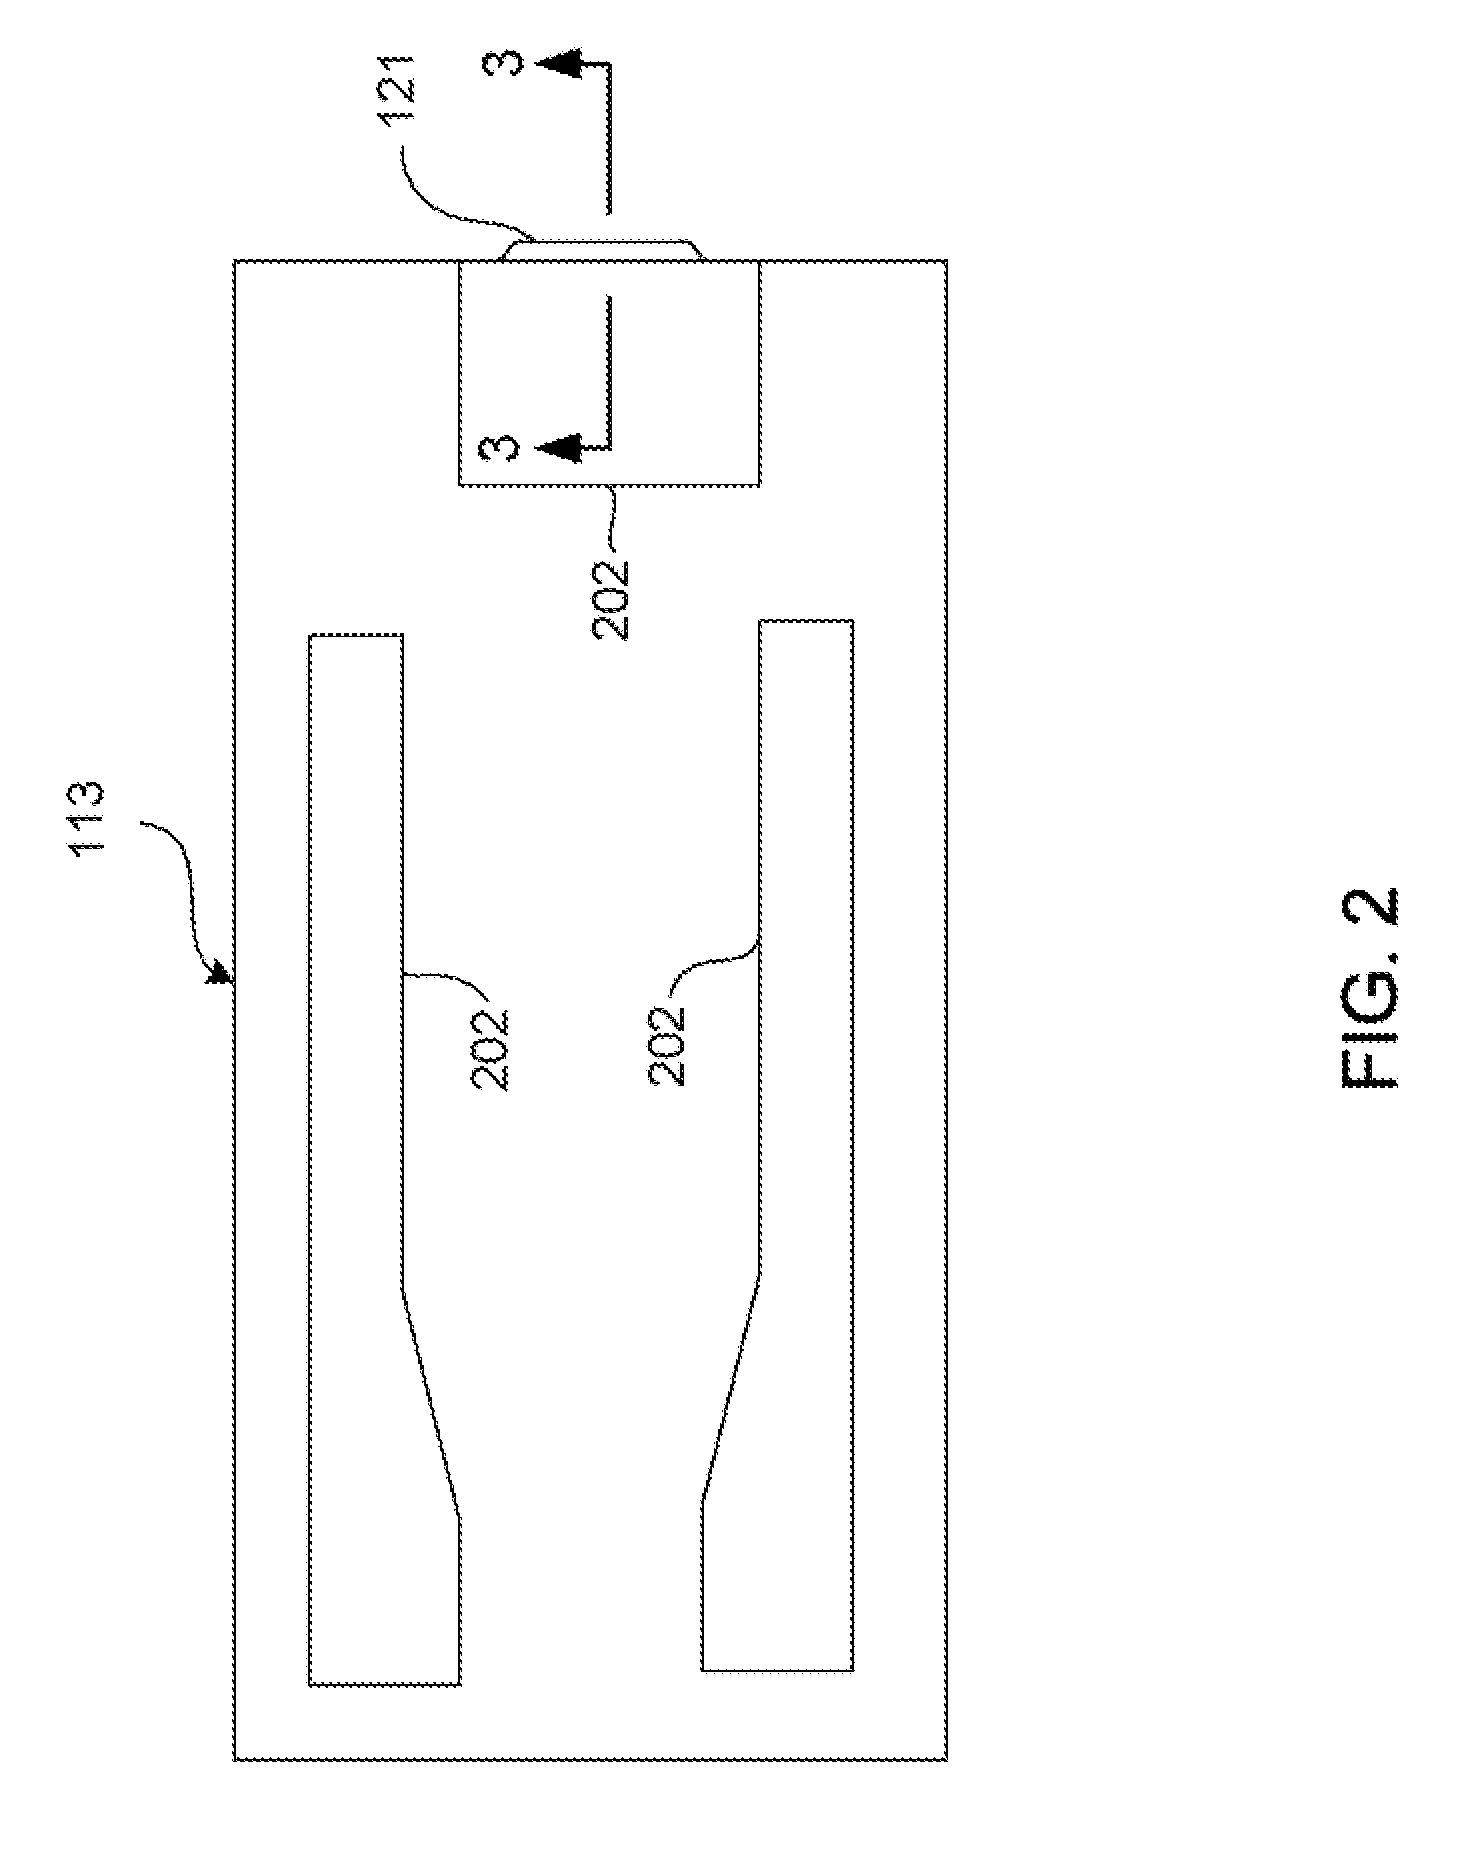 Electrical lapping guide for flare point control and trailing shield throat height in a perpendicular magnetic write head